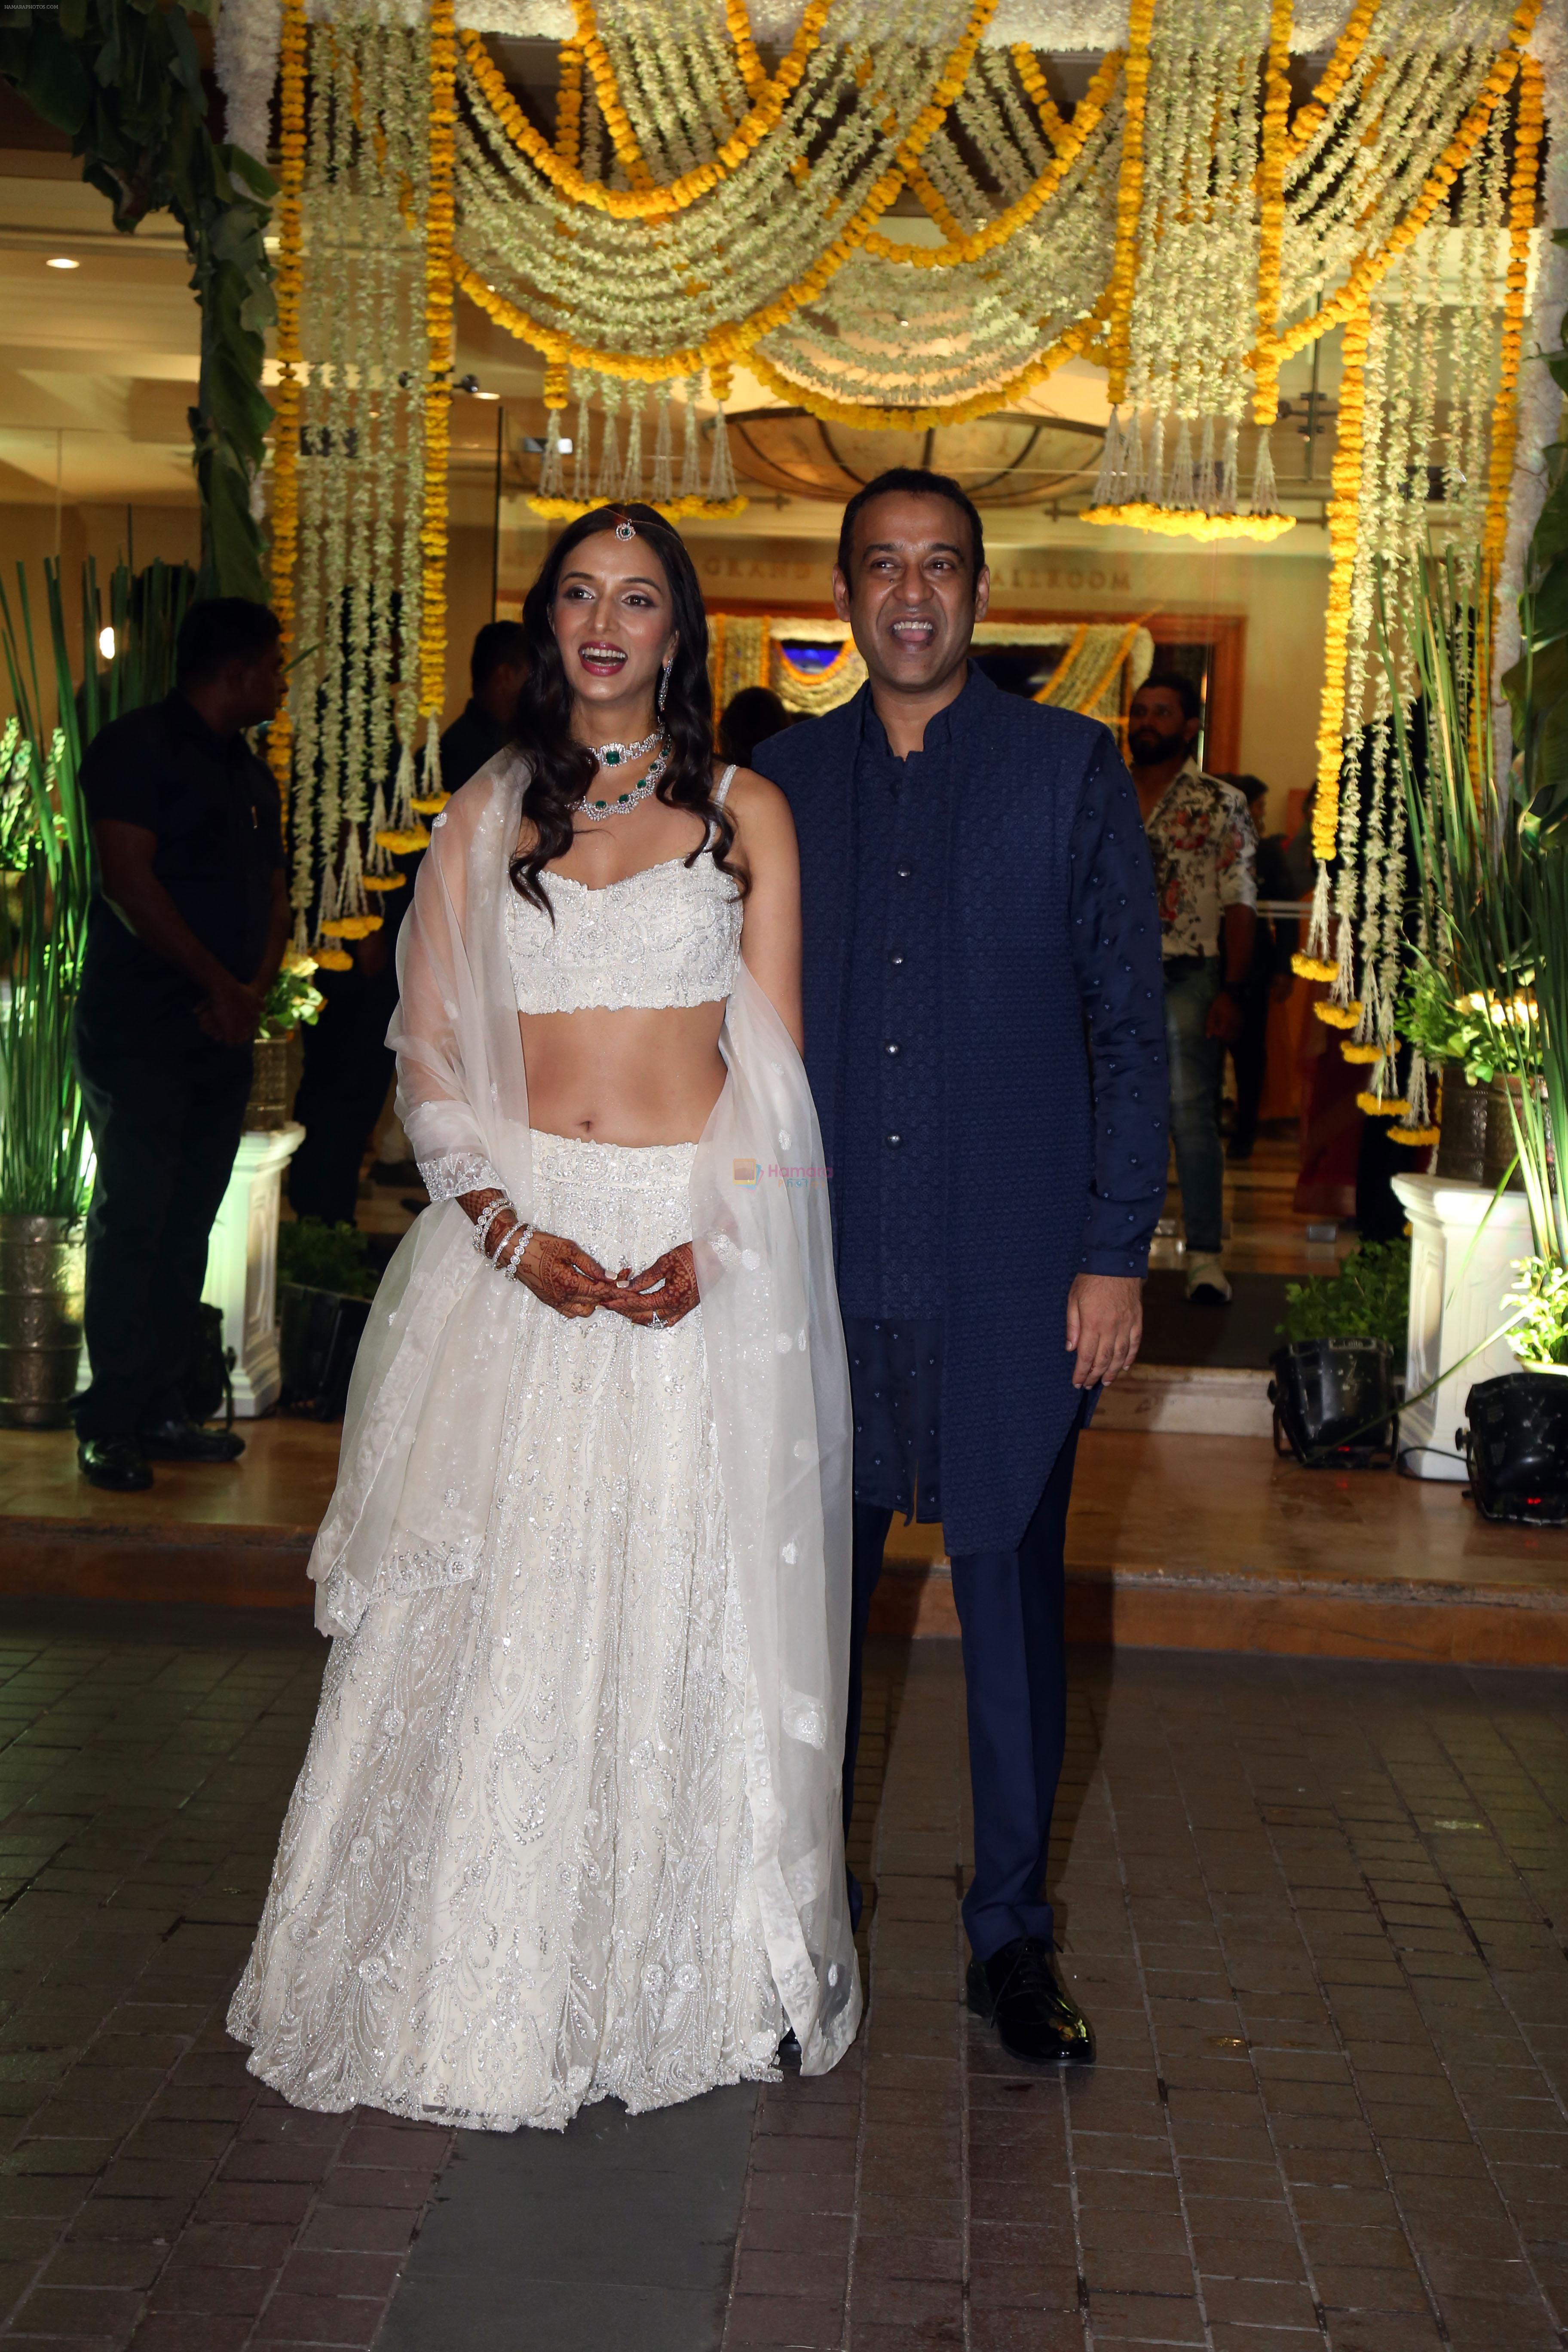 The Bride and the groom at Madhu Mantena and Ira Trivedi wedding ceremony on 11 Jun 2023